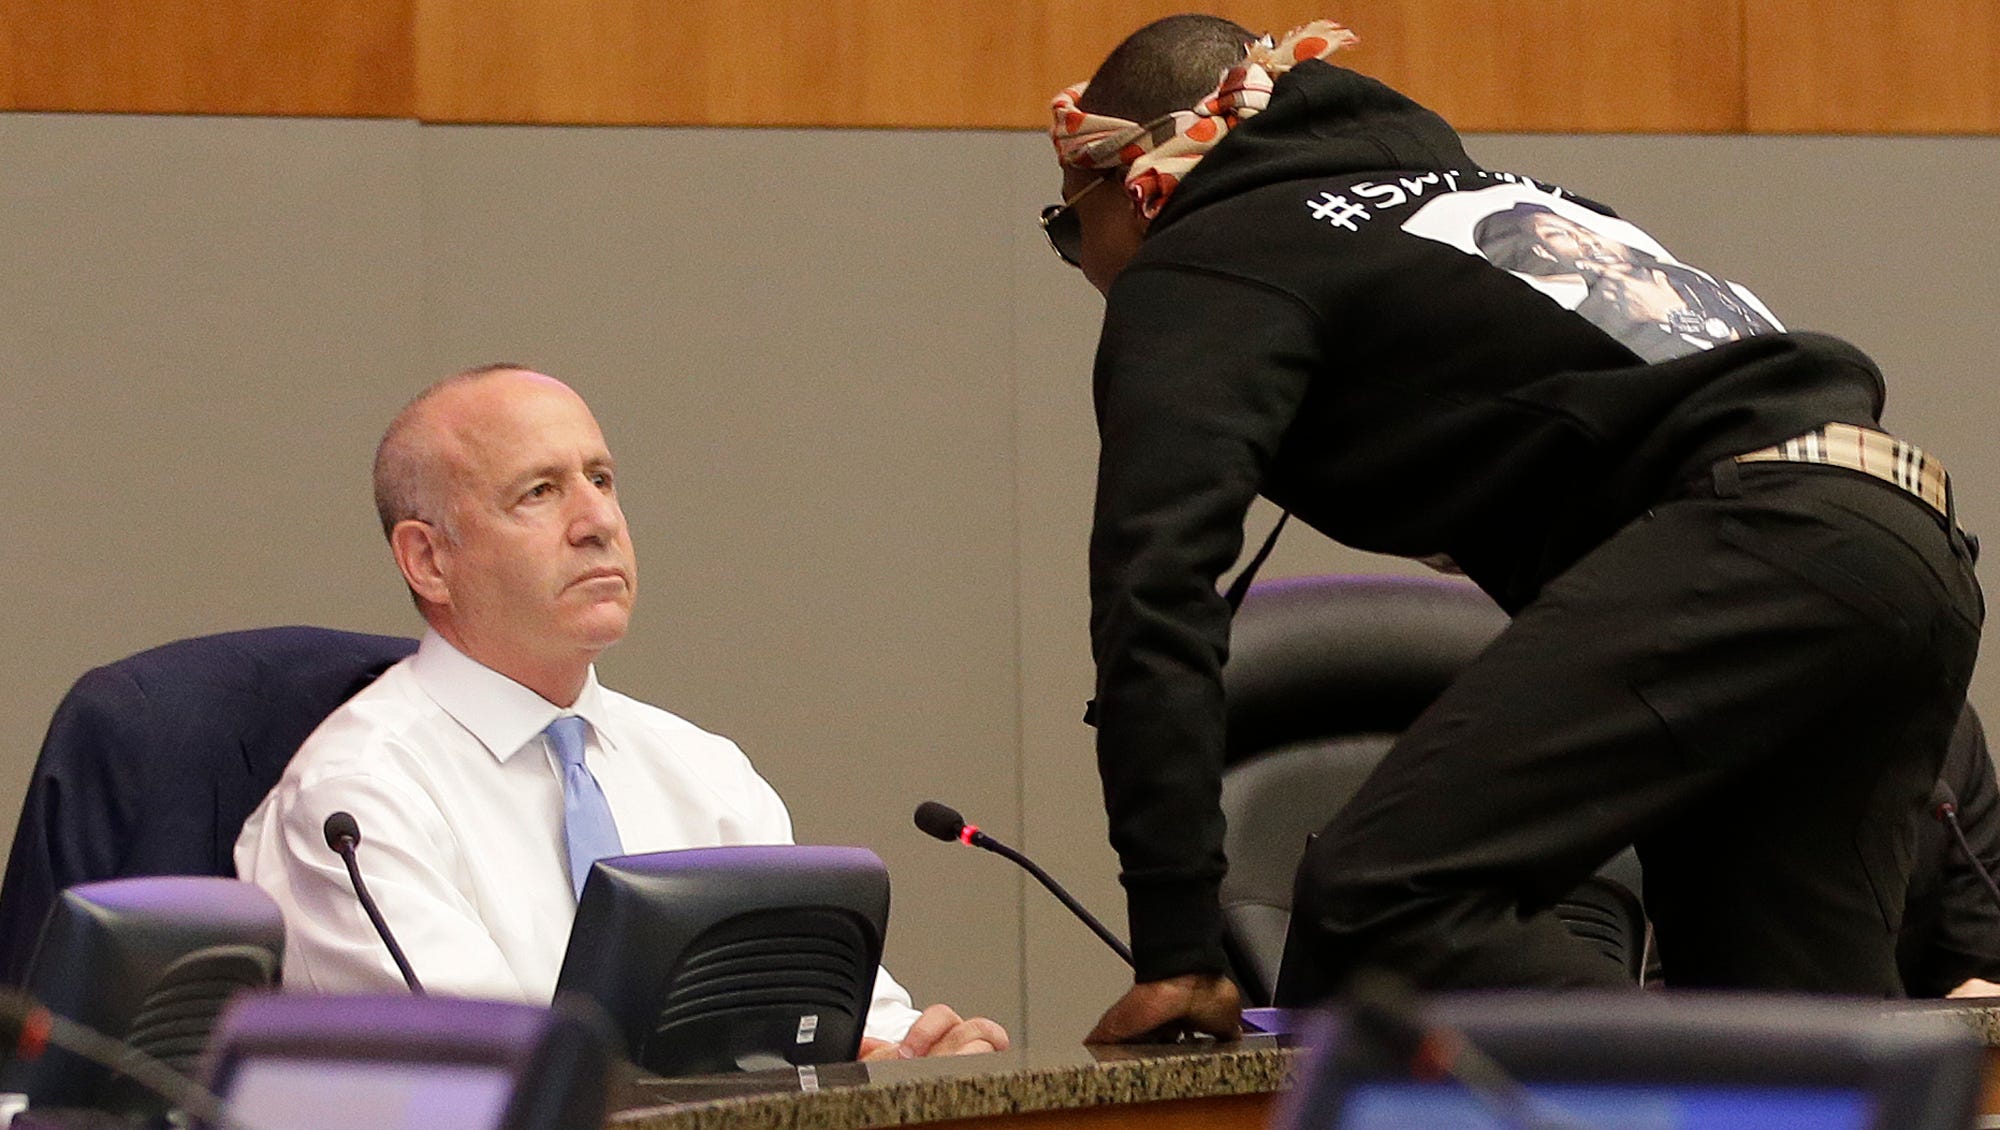 Stephon Clark Protesters Disrupt Council Meeting In Sacramento